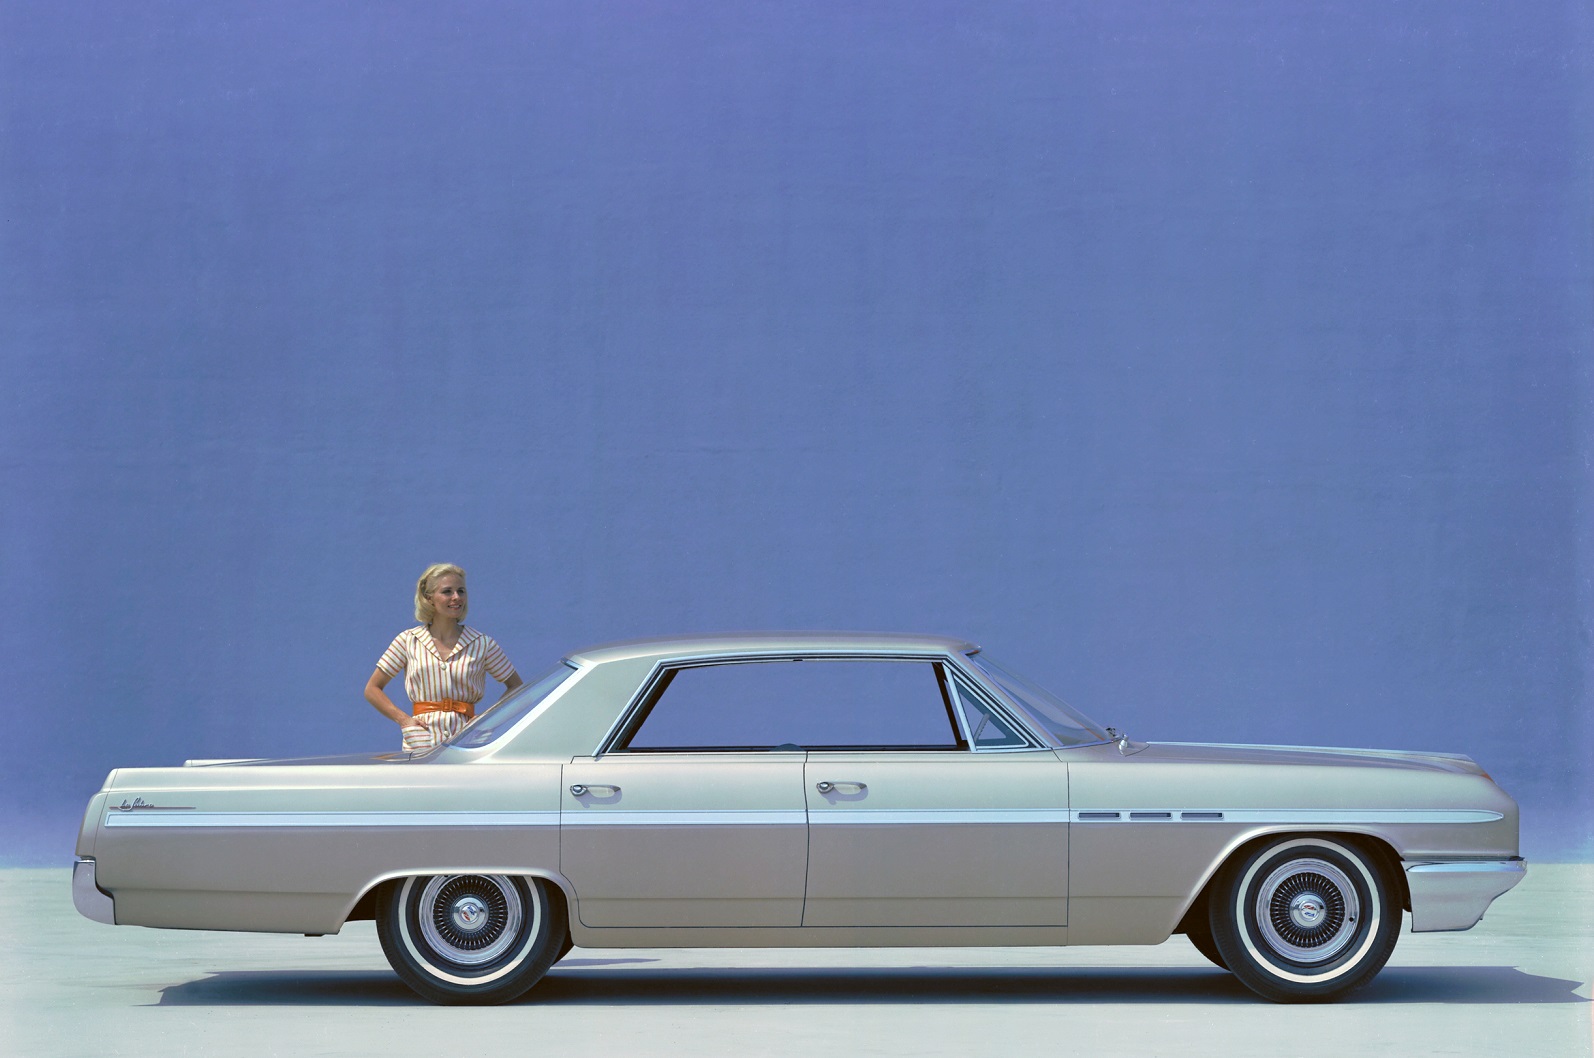 <p>When Buick launched the first Le Sabre at the height of the <strong>fins and chrome era</strong> in the late 1950s USA, it was every inch of its considerable length a <strong>rival for Cadillac</strong>. It remained a sharp-suited choice through the 1960s, but the ’70s onwards were not kind to it and by the time its demise came about, the Le Sabre was bloated and ungainly. The upside is it had added 6 million sales to GM’s bottom line.</p>